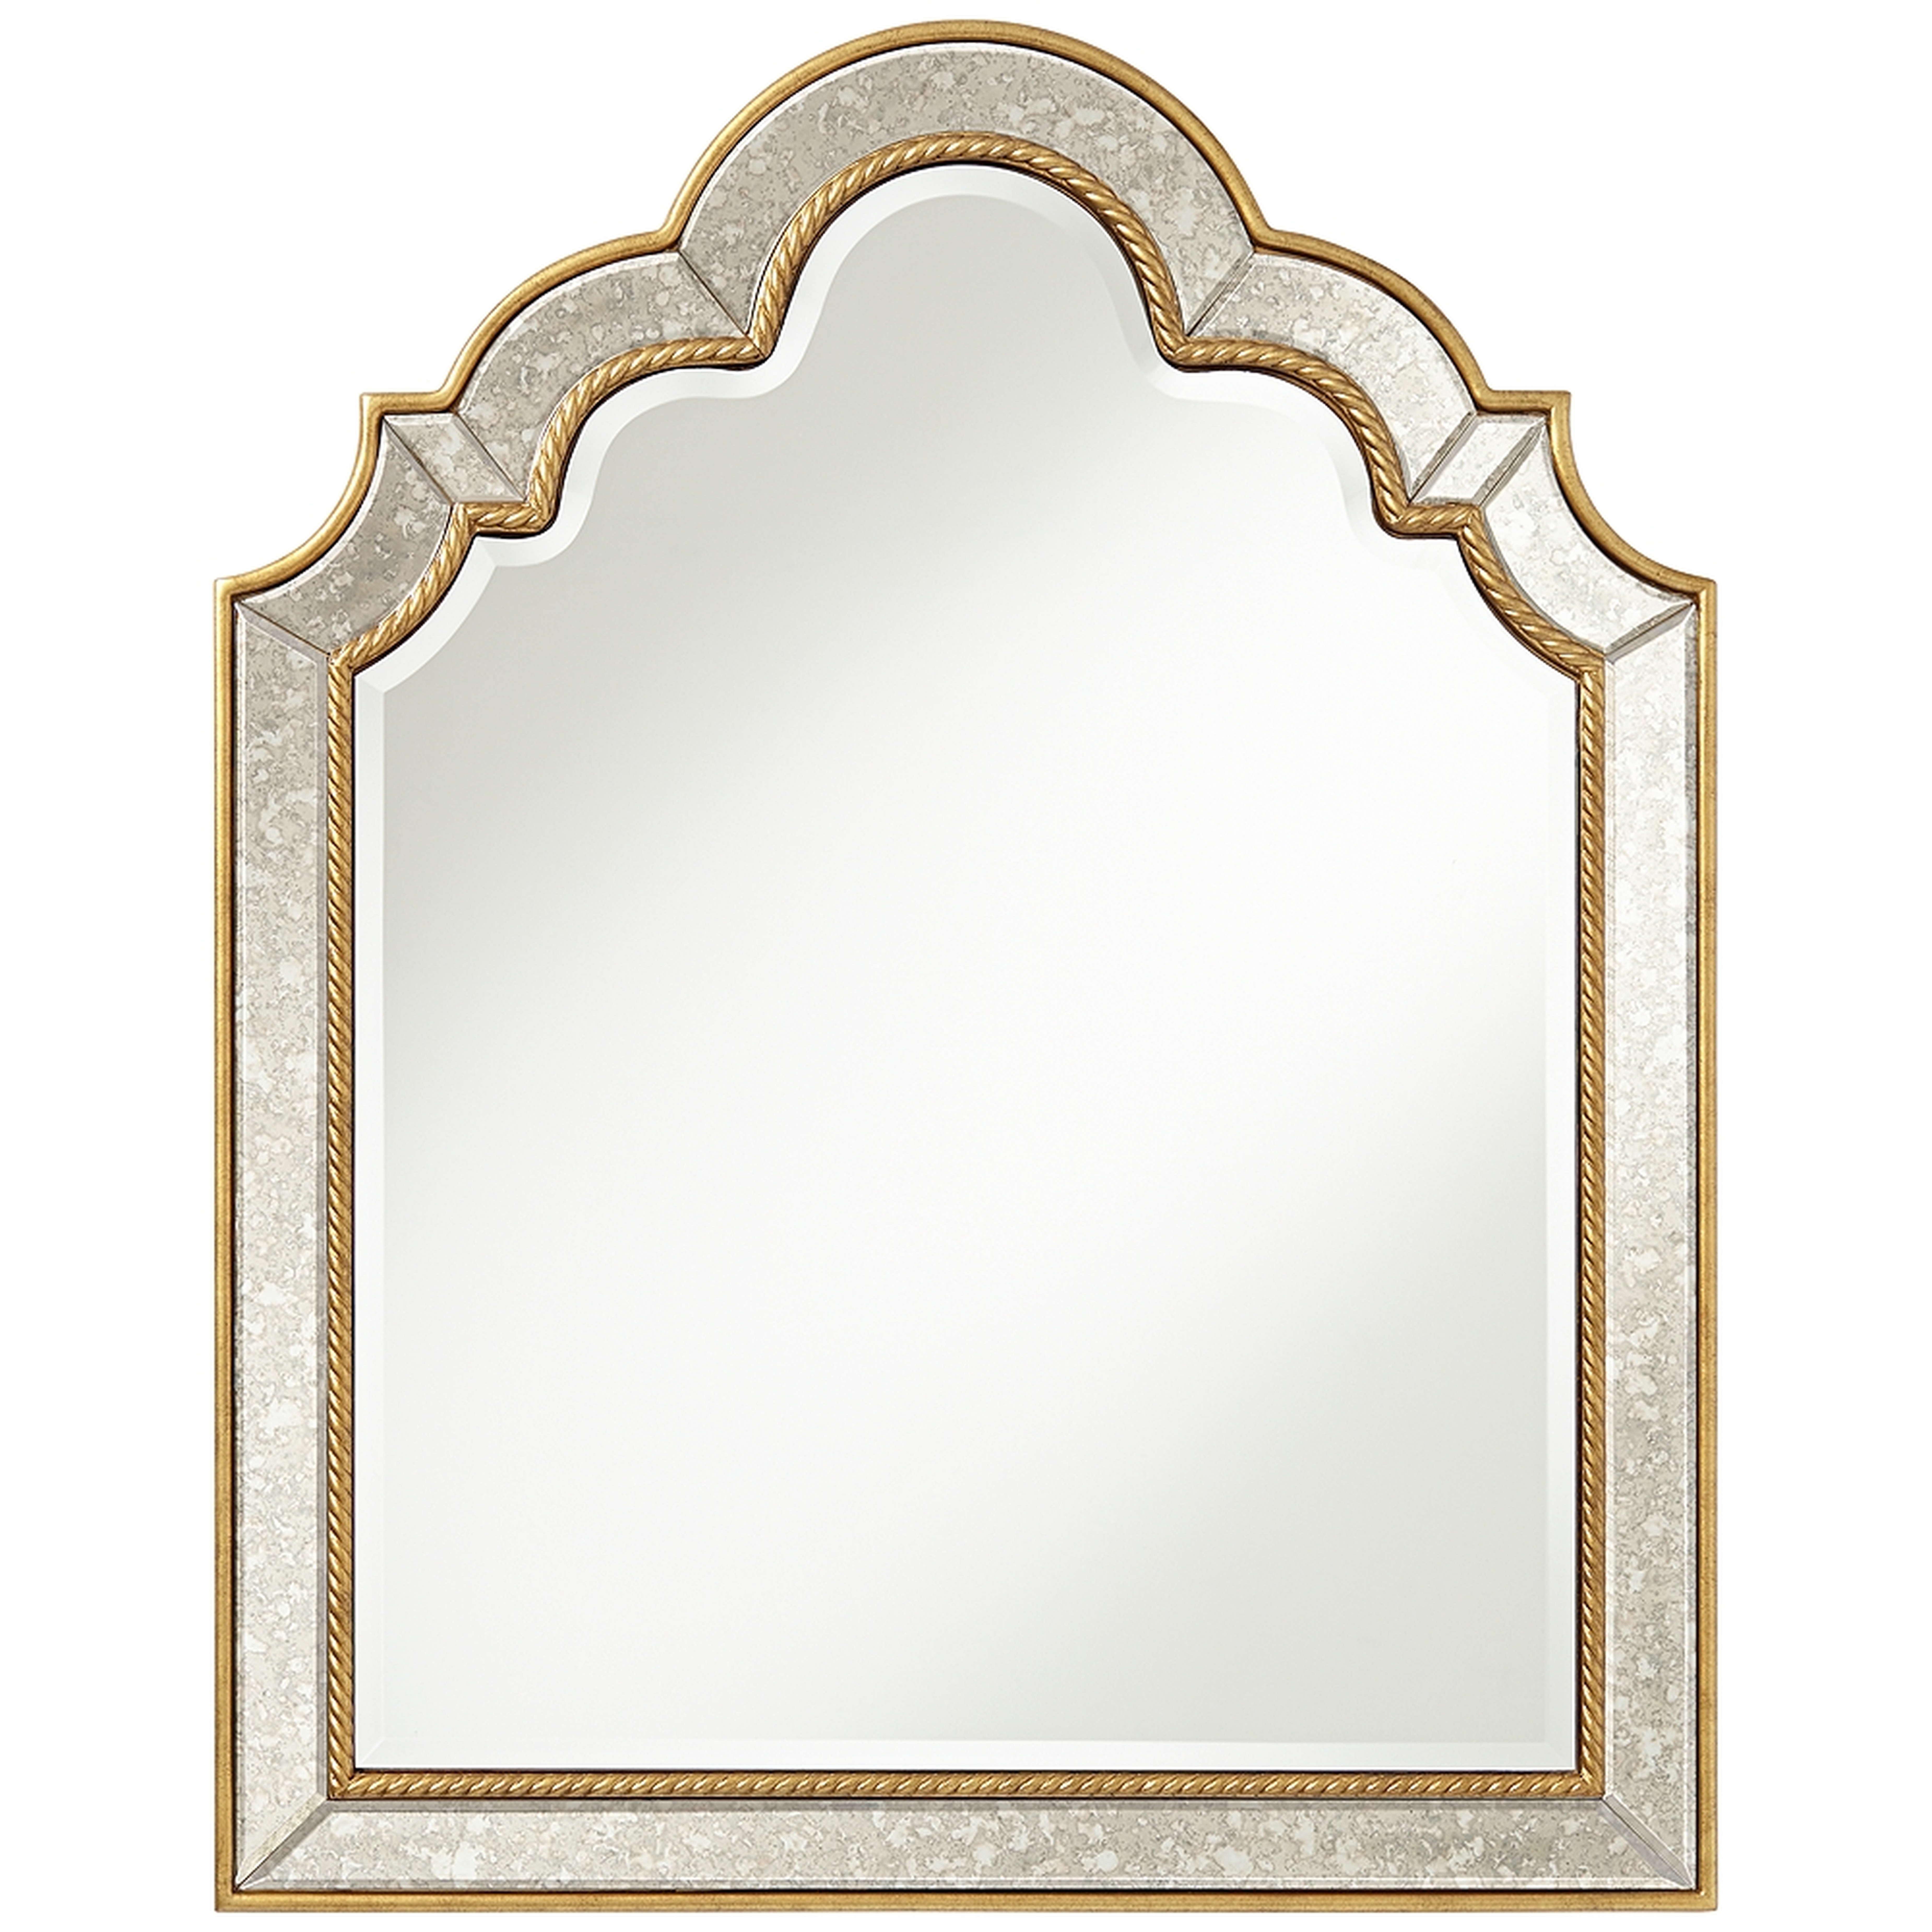 Barrie 28 1/4" x 35 1/2" Gold Antique Arch Wall Mirror - Style # 75N16 - Lamps Plus